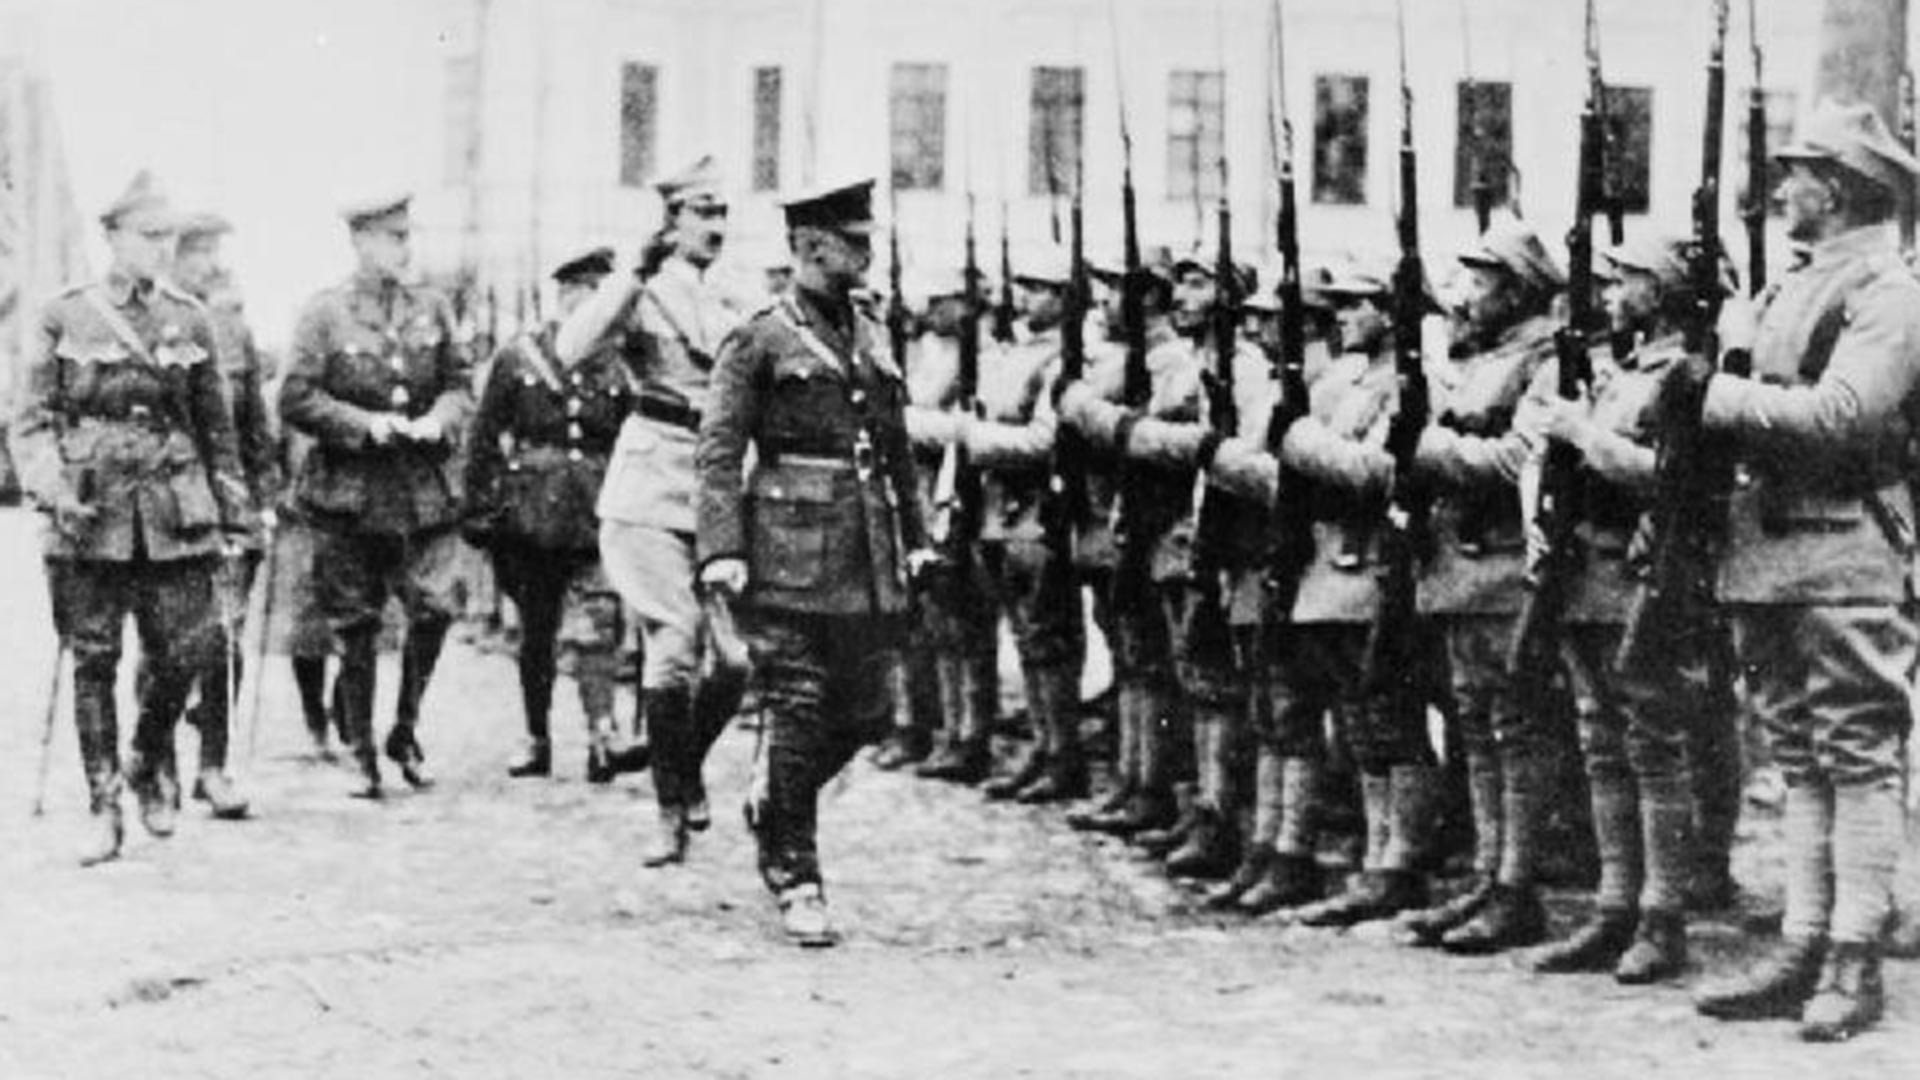 Polish, British and French officers inspecting a detachment of Polish troops of so called Murmansk Battalion before their departure for the front, Archangel 1919.